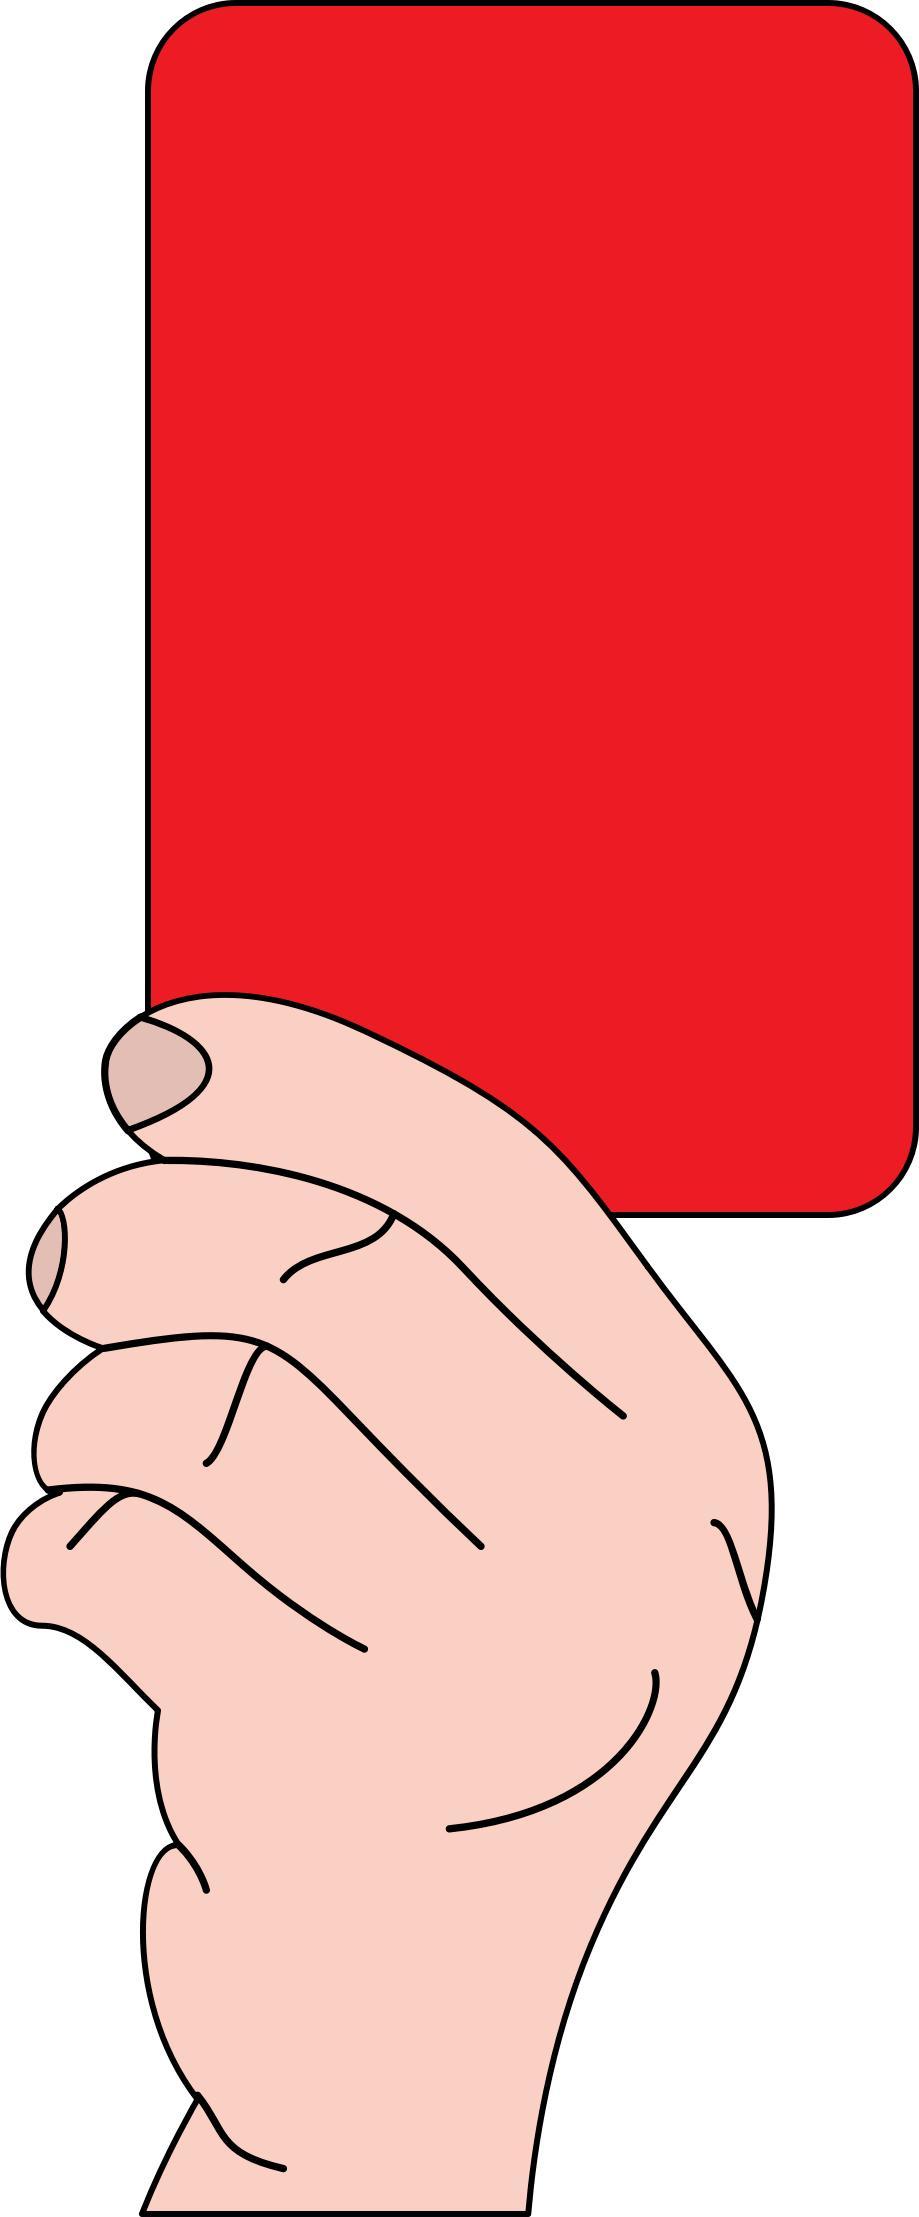 Referee showing red card png transparent